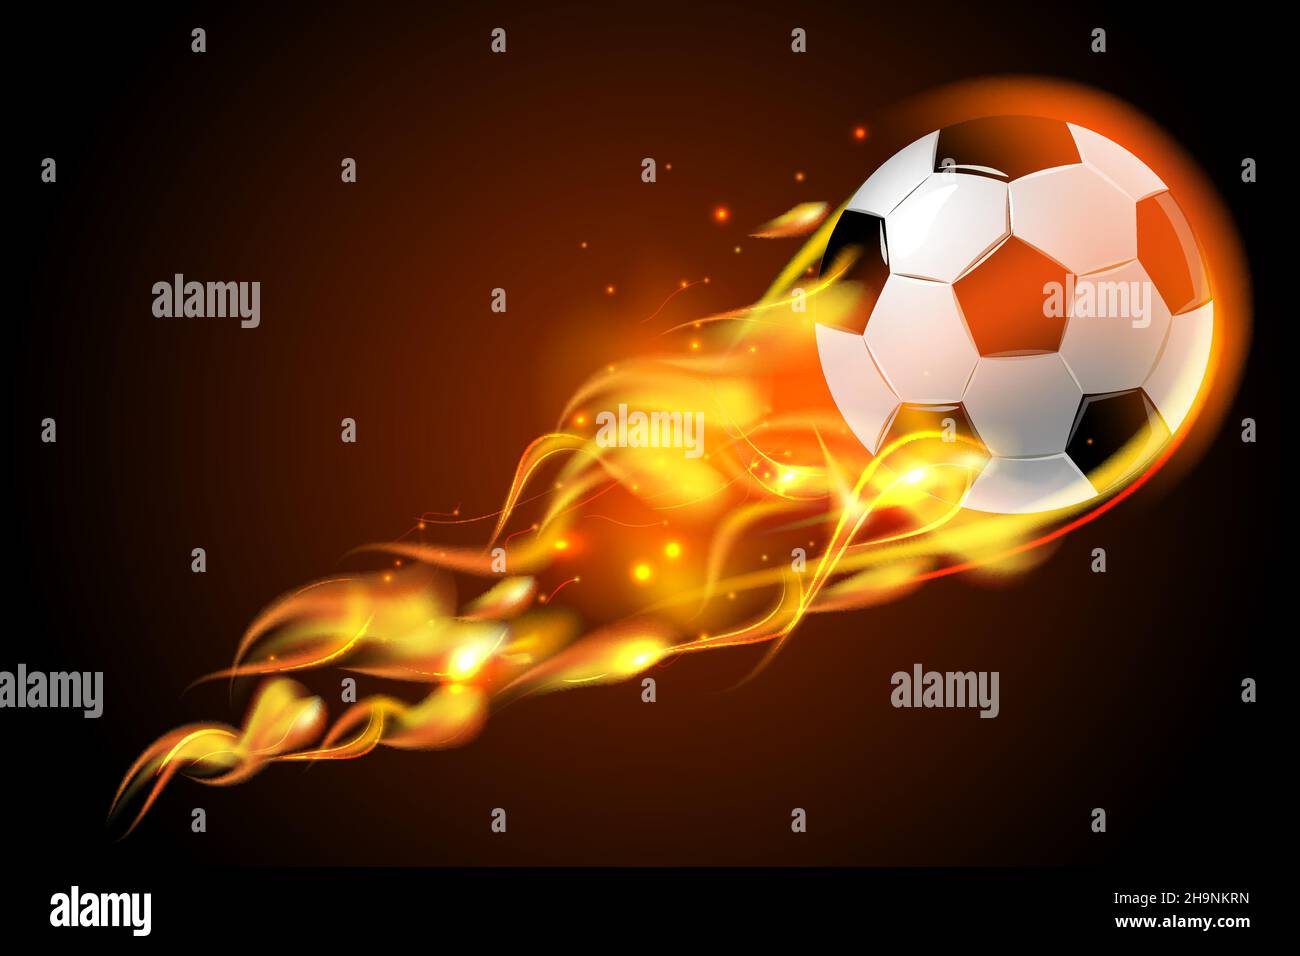 Realistic color soccer ball fire for football on black background poster vector illustration Stock Vector